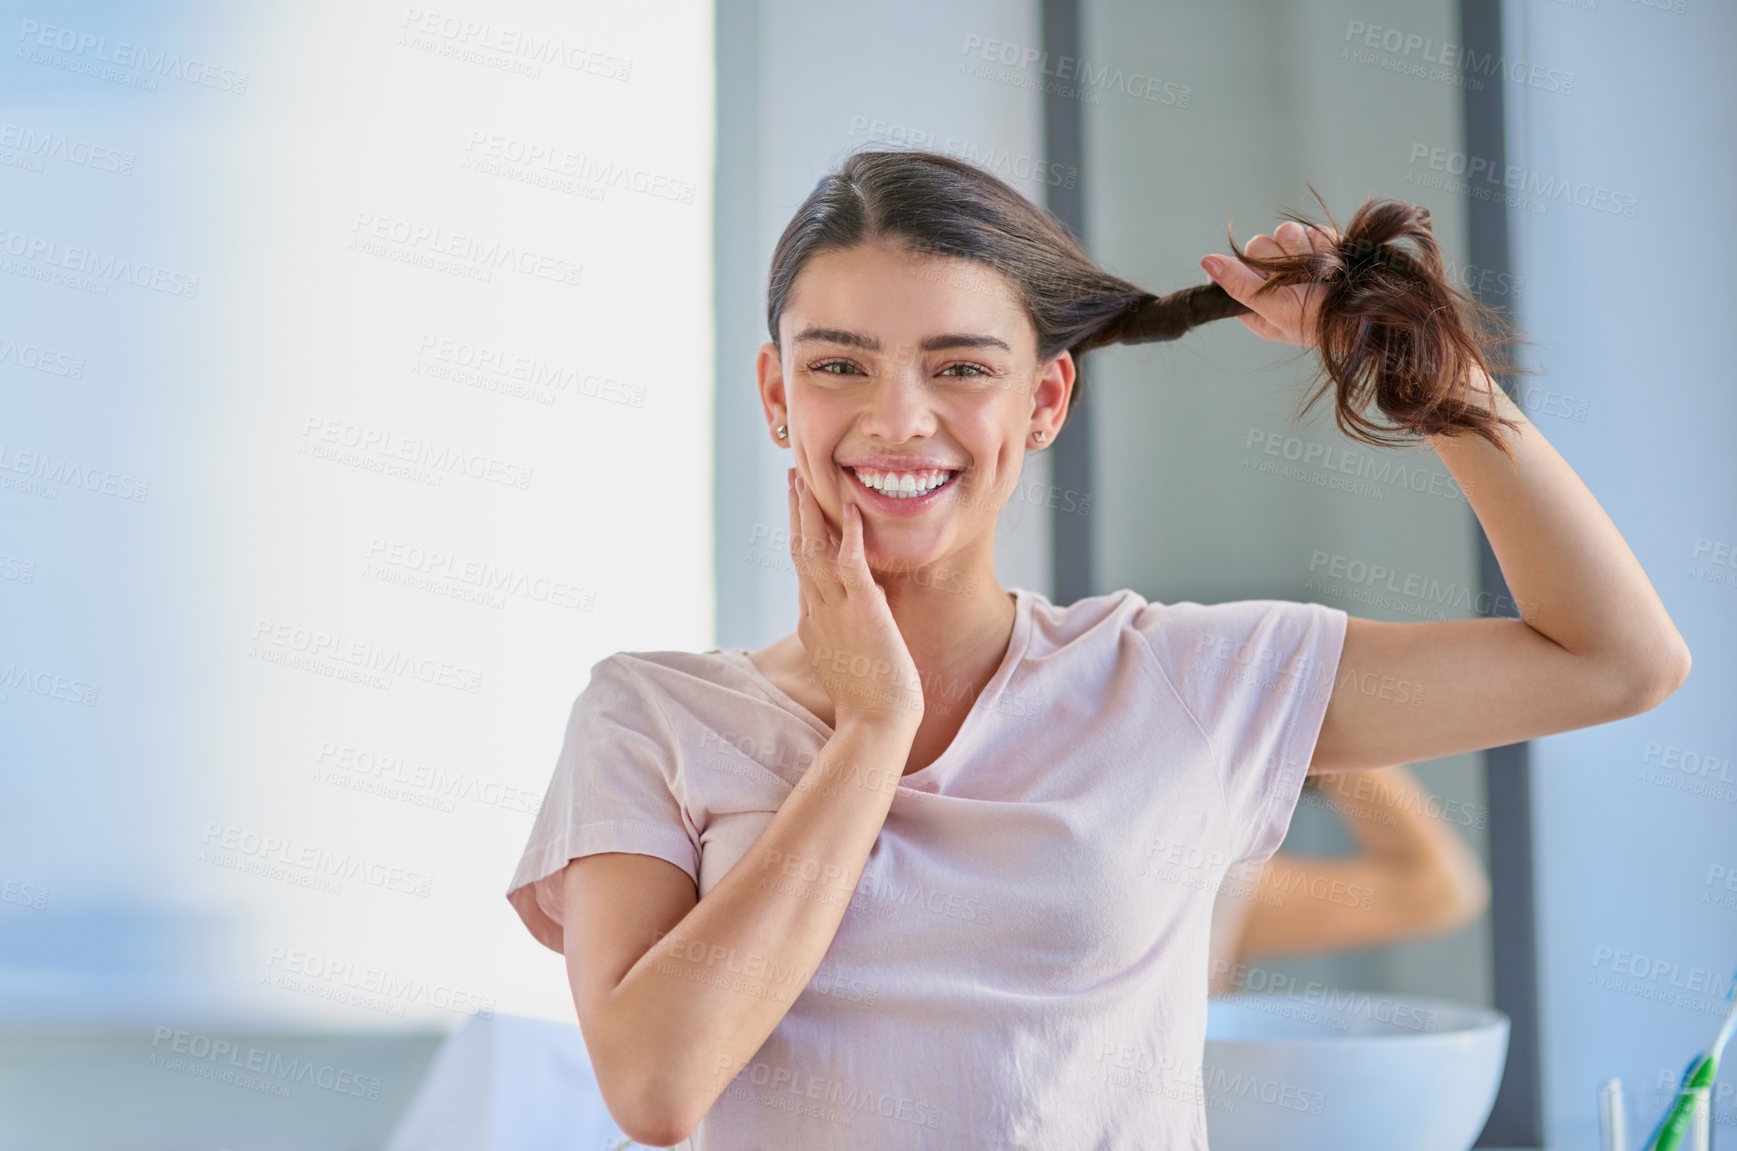 Buy stock photo Cropped portrait of a beautiful young woman stretching her gar out in the bathroom at home